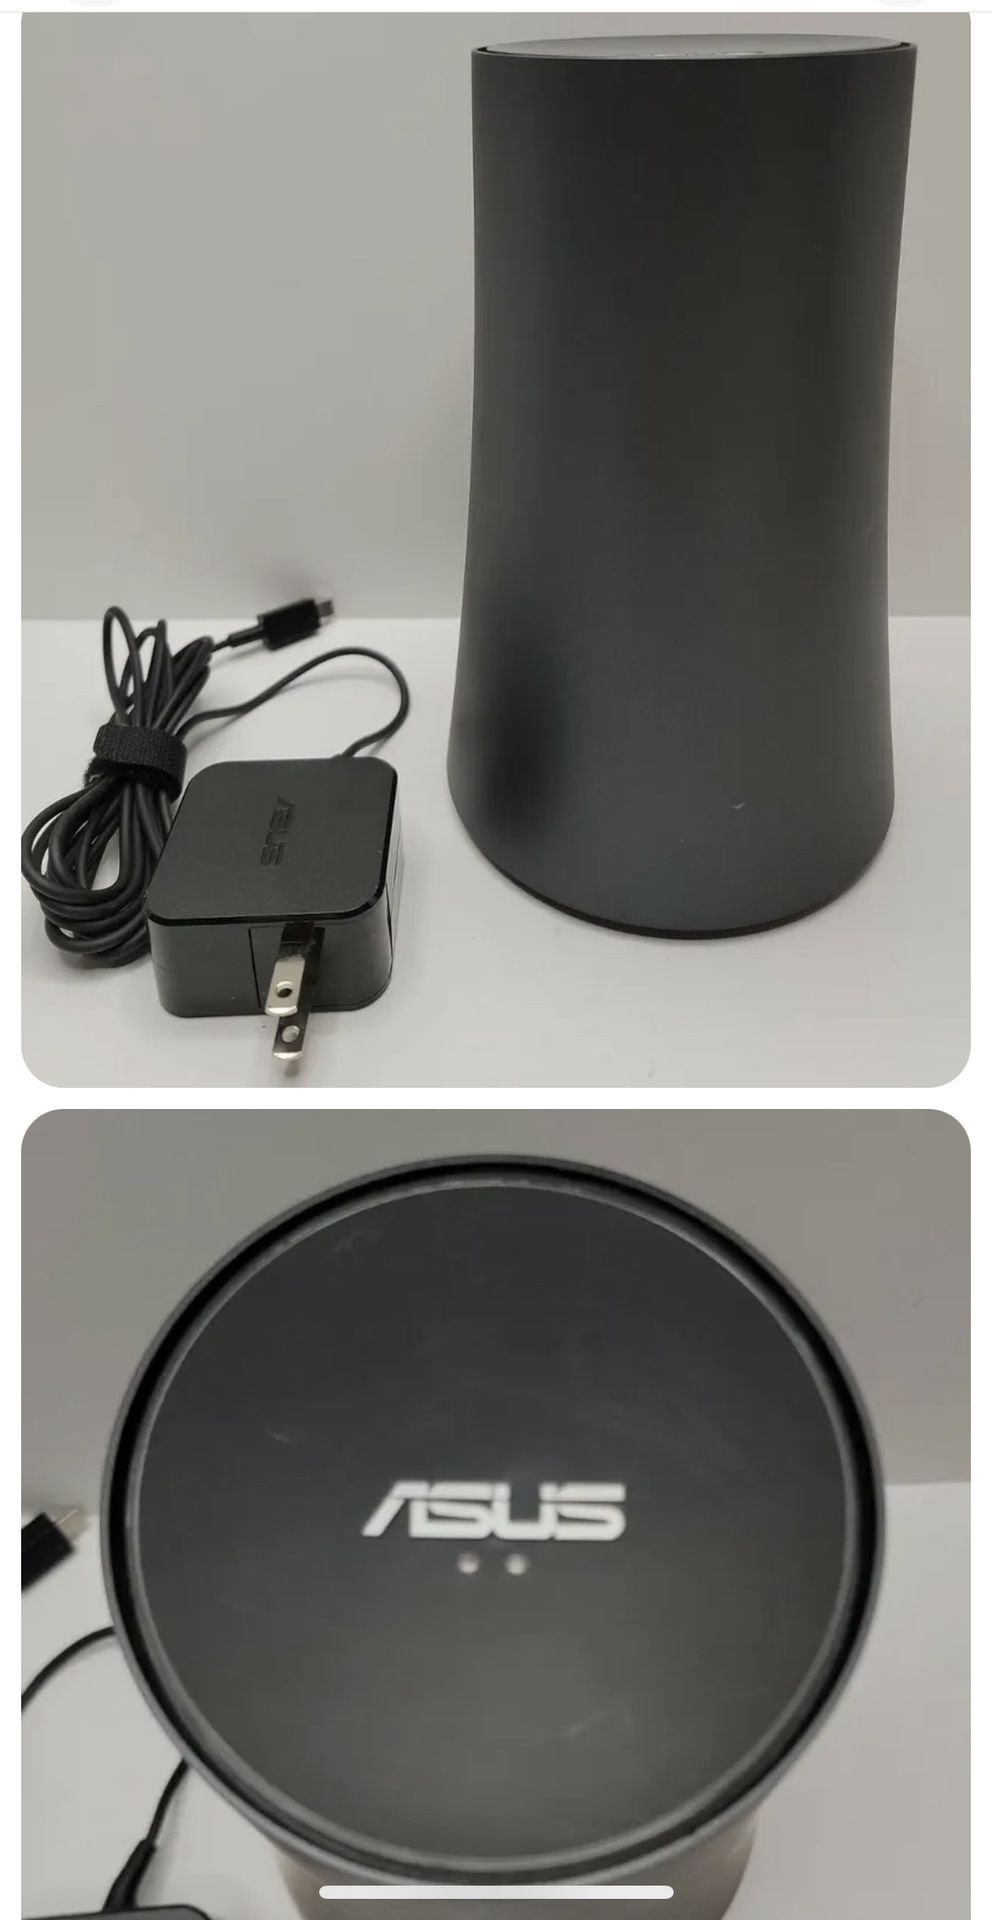 ASUS SRT-AC1900 Google Onhub Wi-Fi Router With Power Cable.